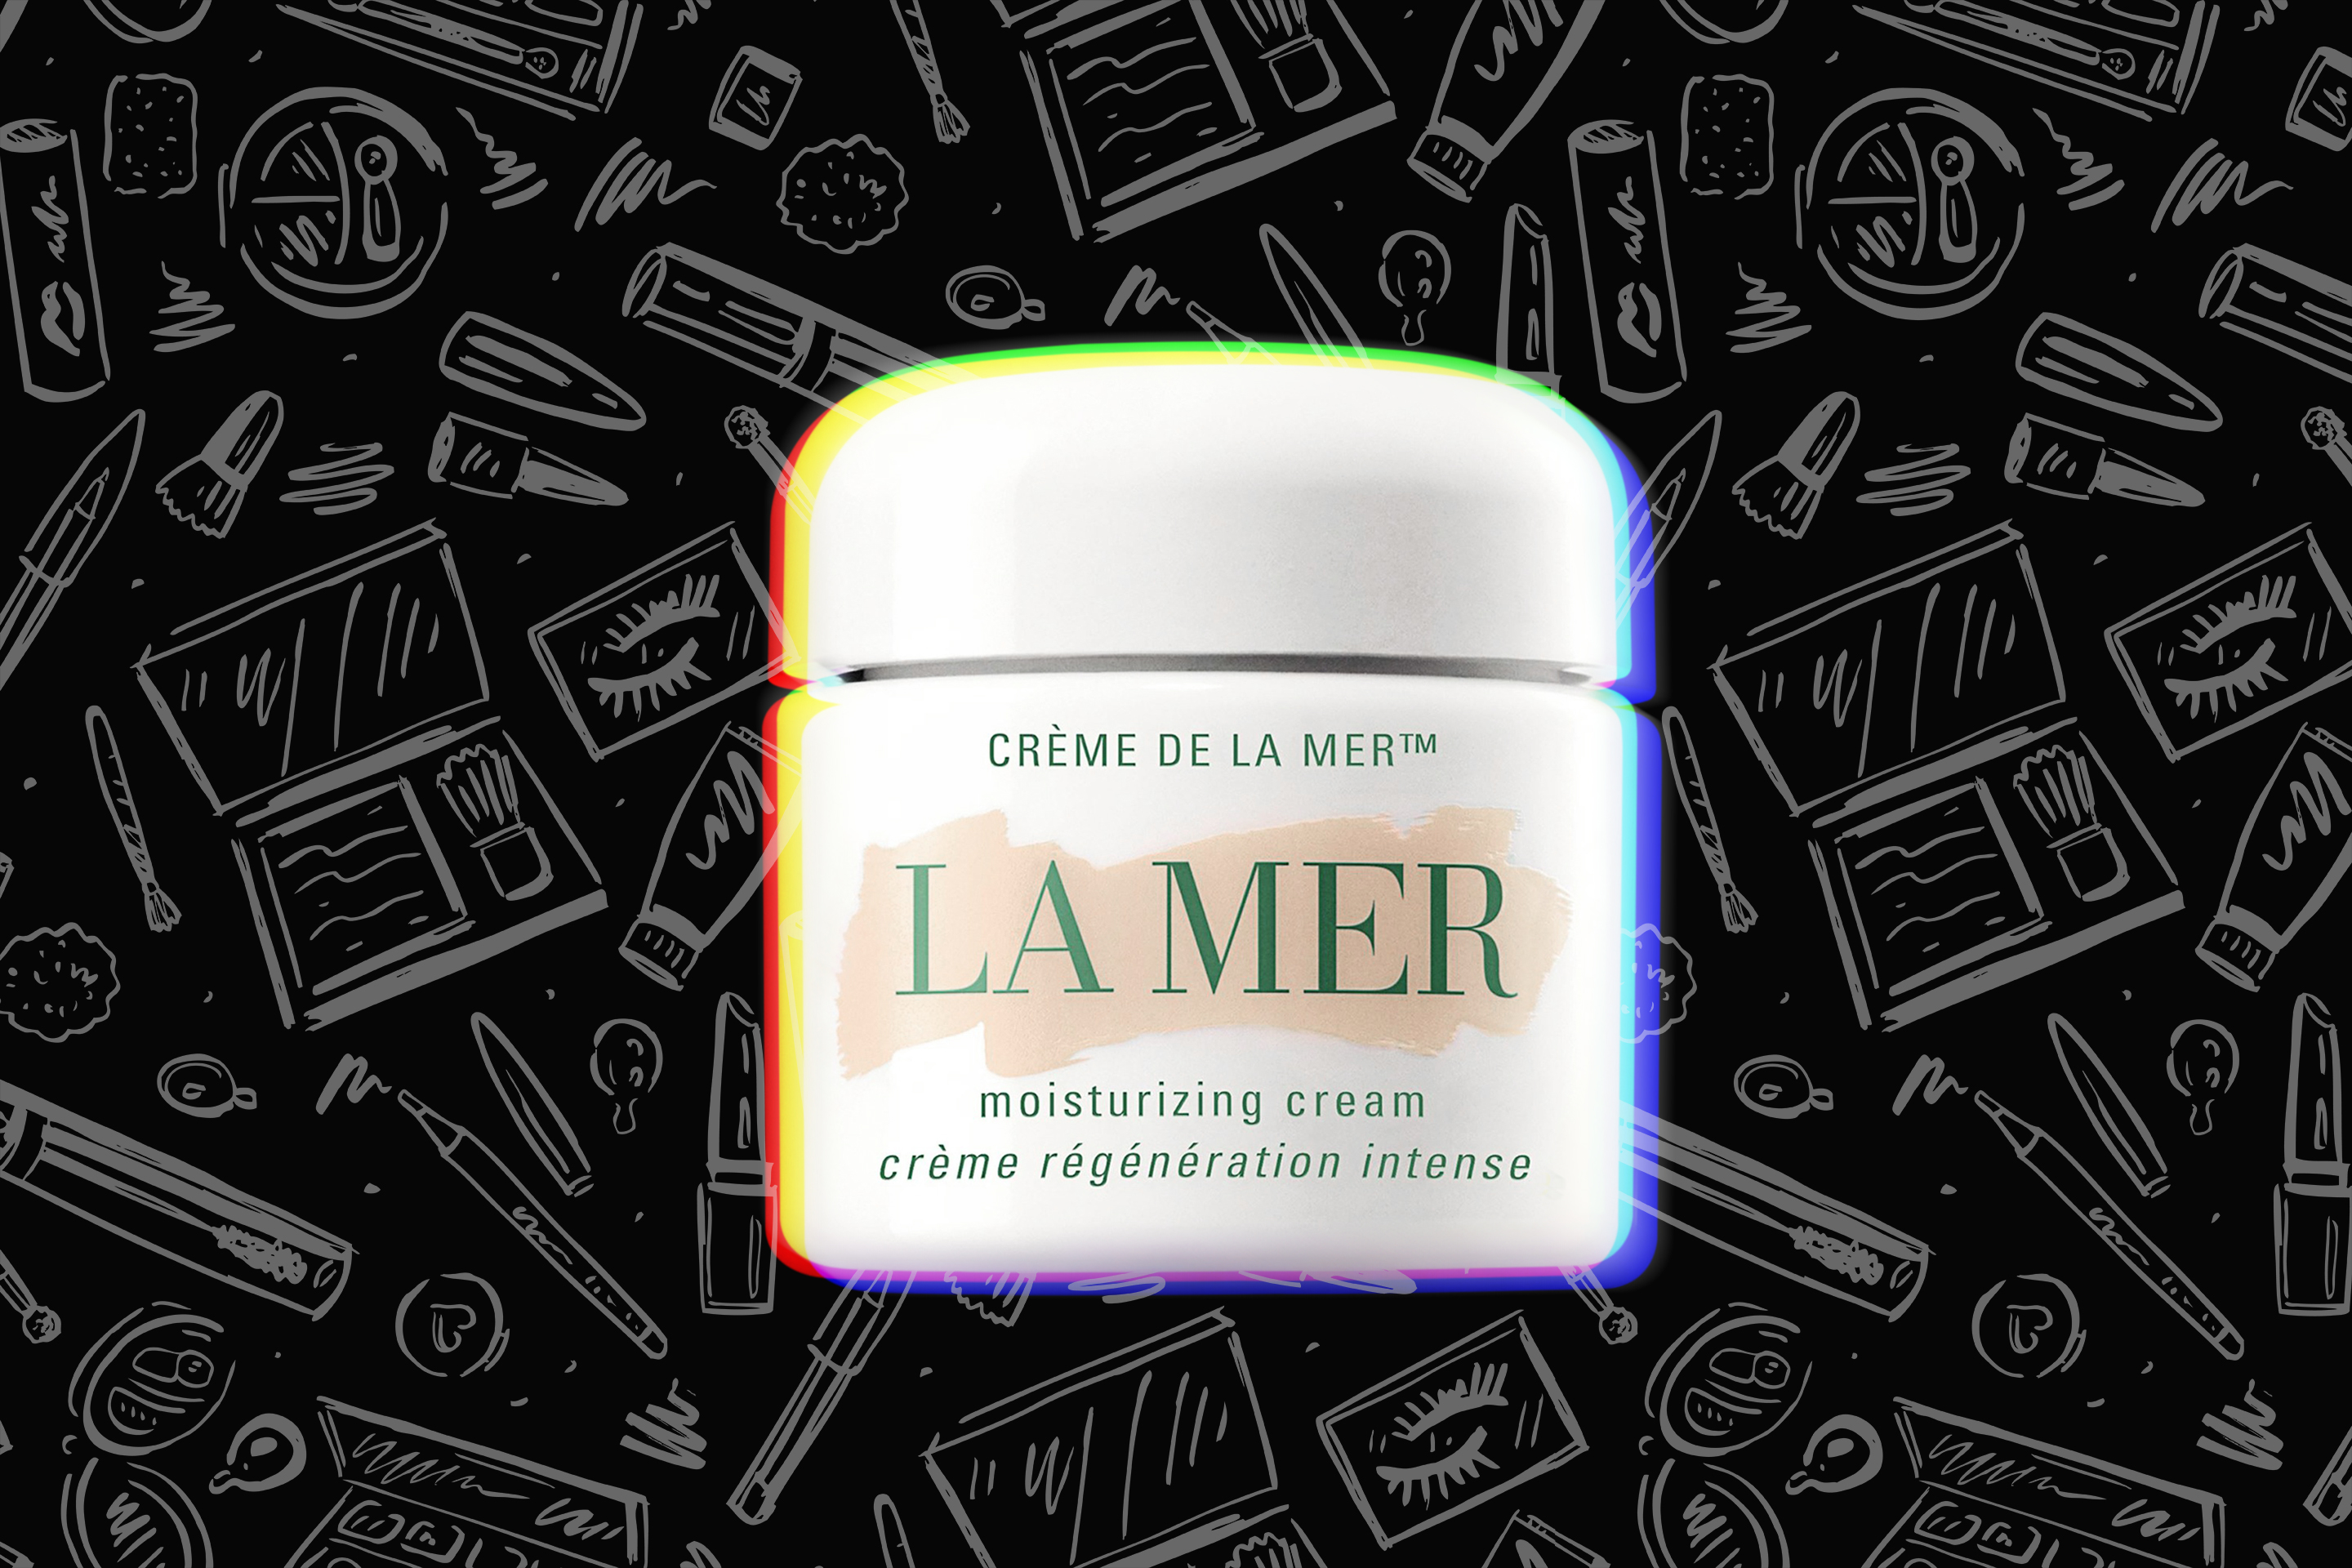 Is La Mer Worth It? Expert Luxury Reviews Cream Money Face of the 